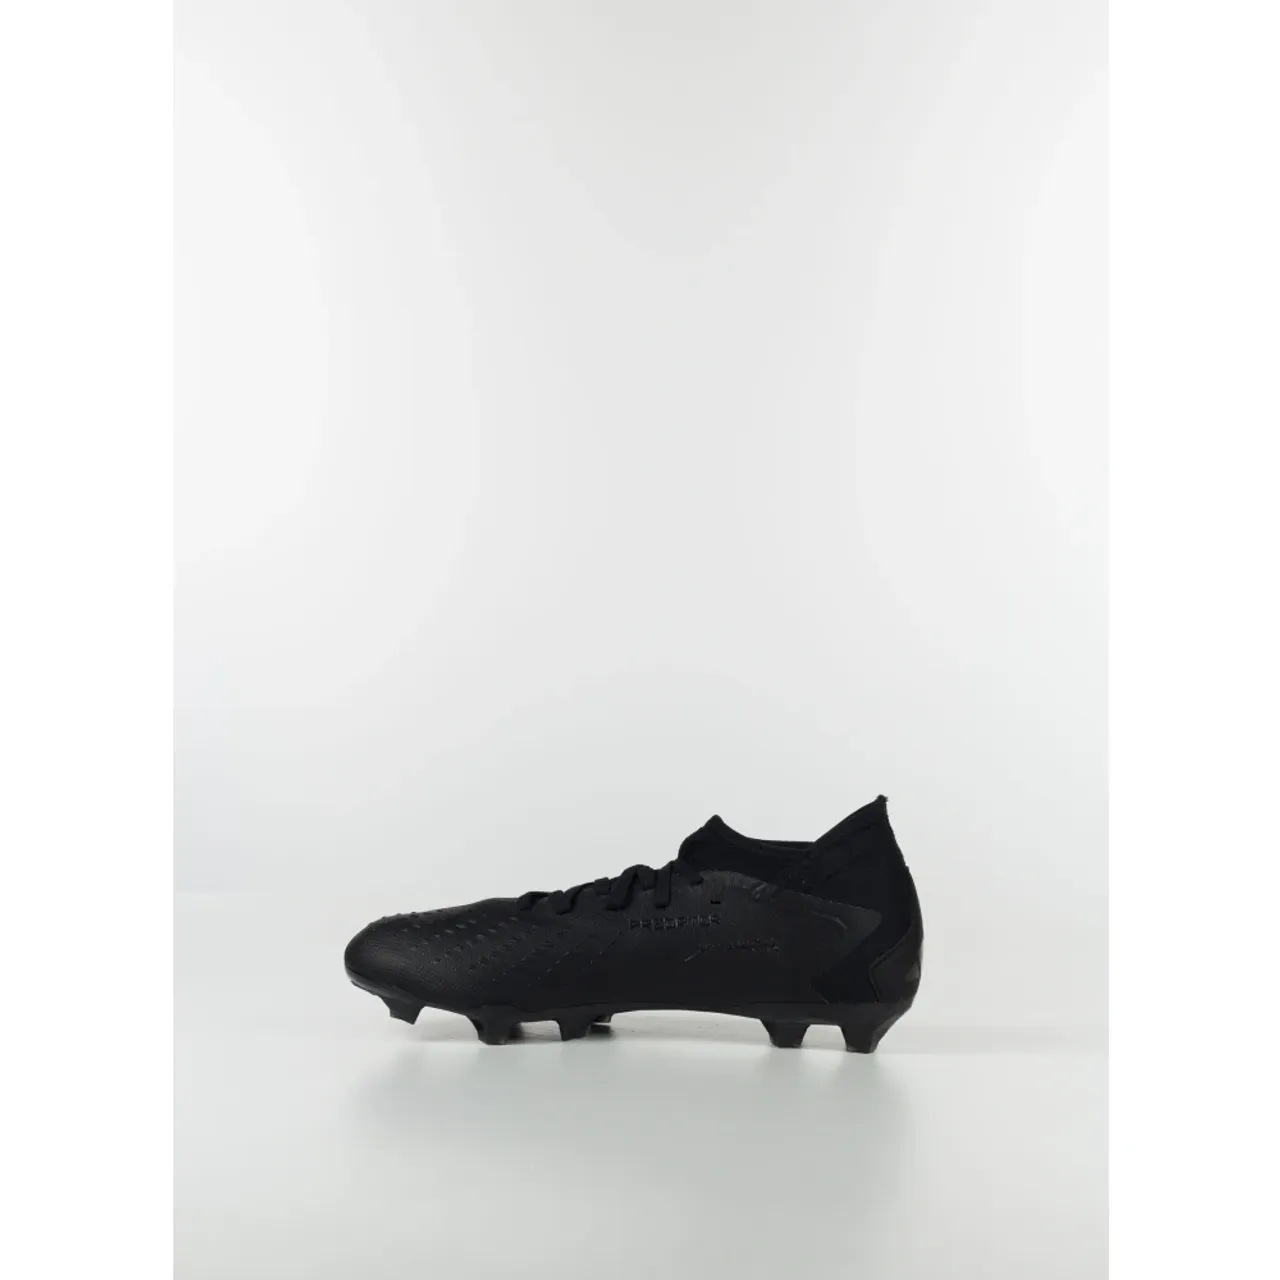 Adidas , Soccer Shoes with High Definition Texture ,Black male, Sizes: